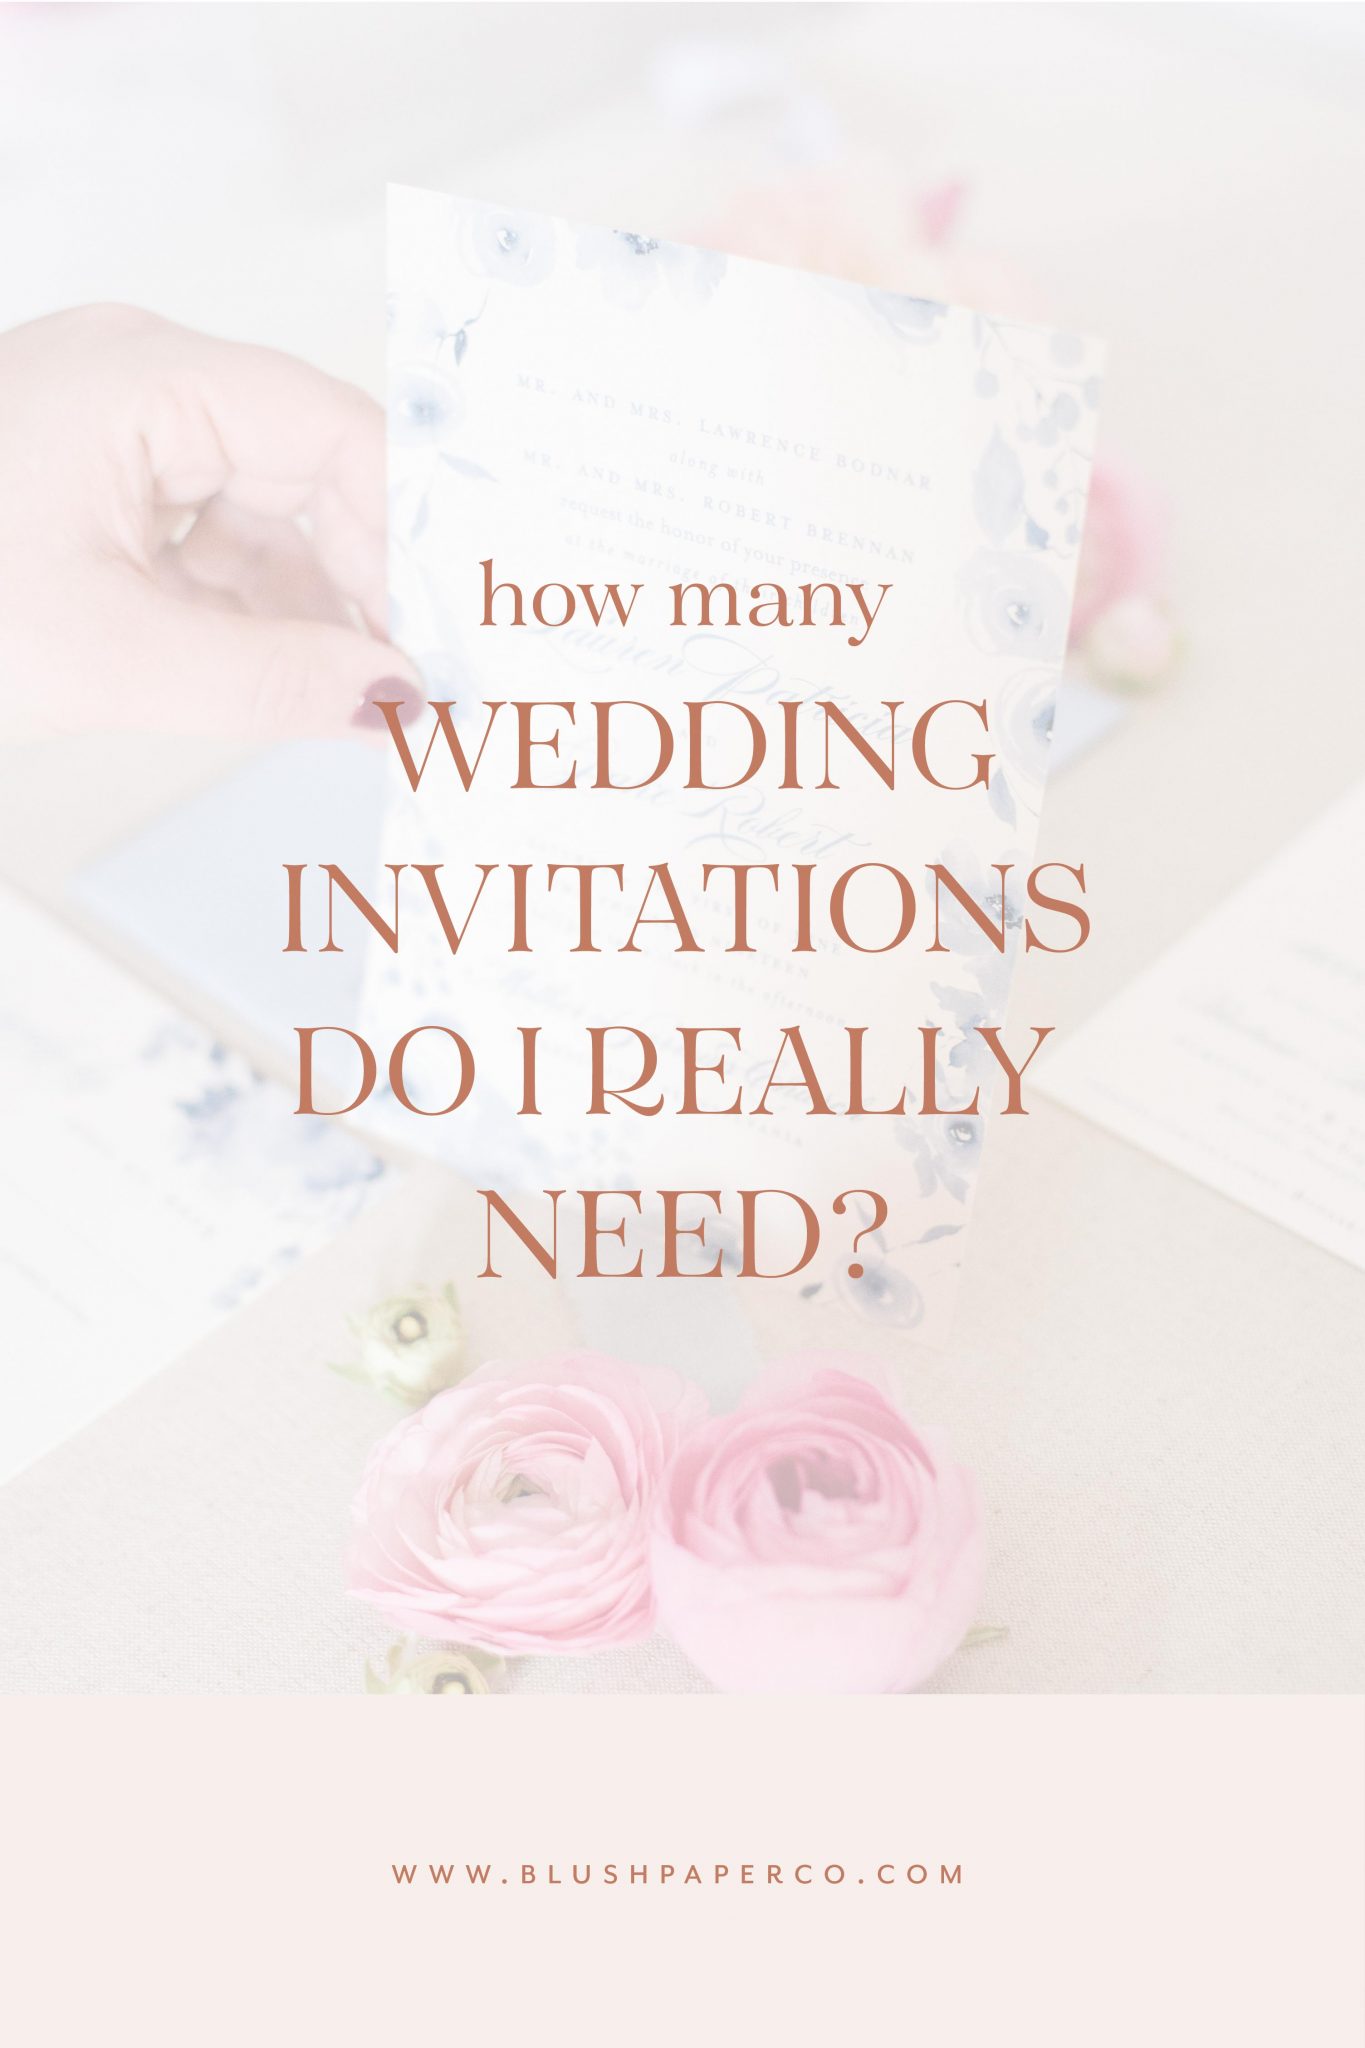 Find Out How Many Wedding Invitations to Order - blog.blushpaperco.com